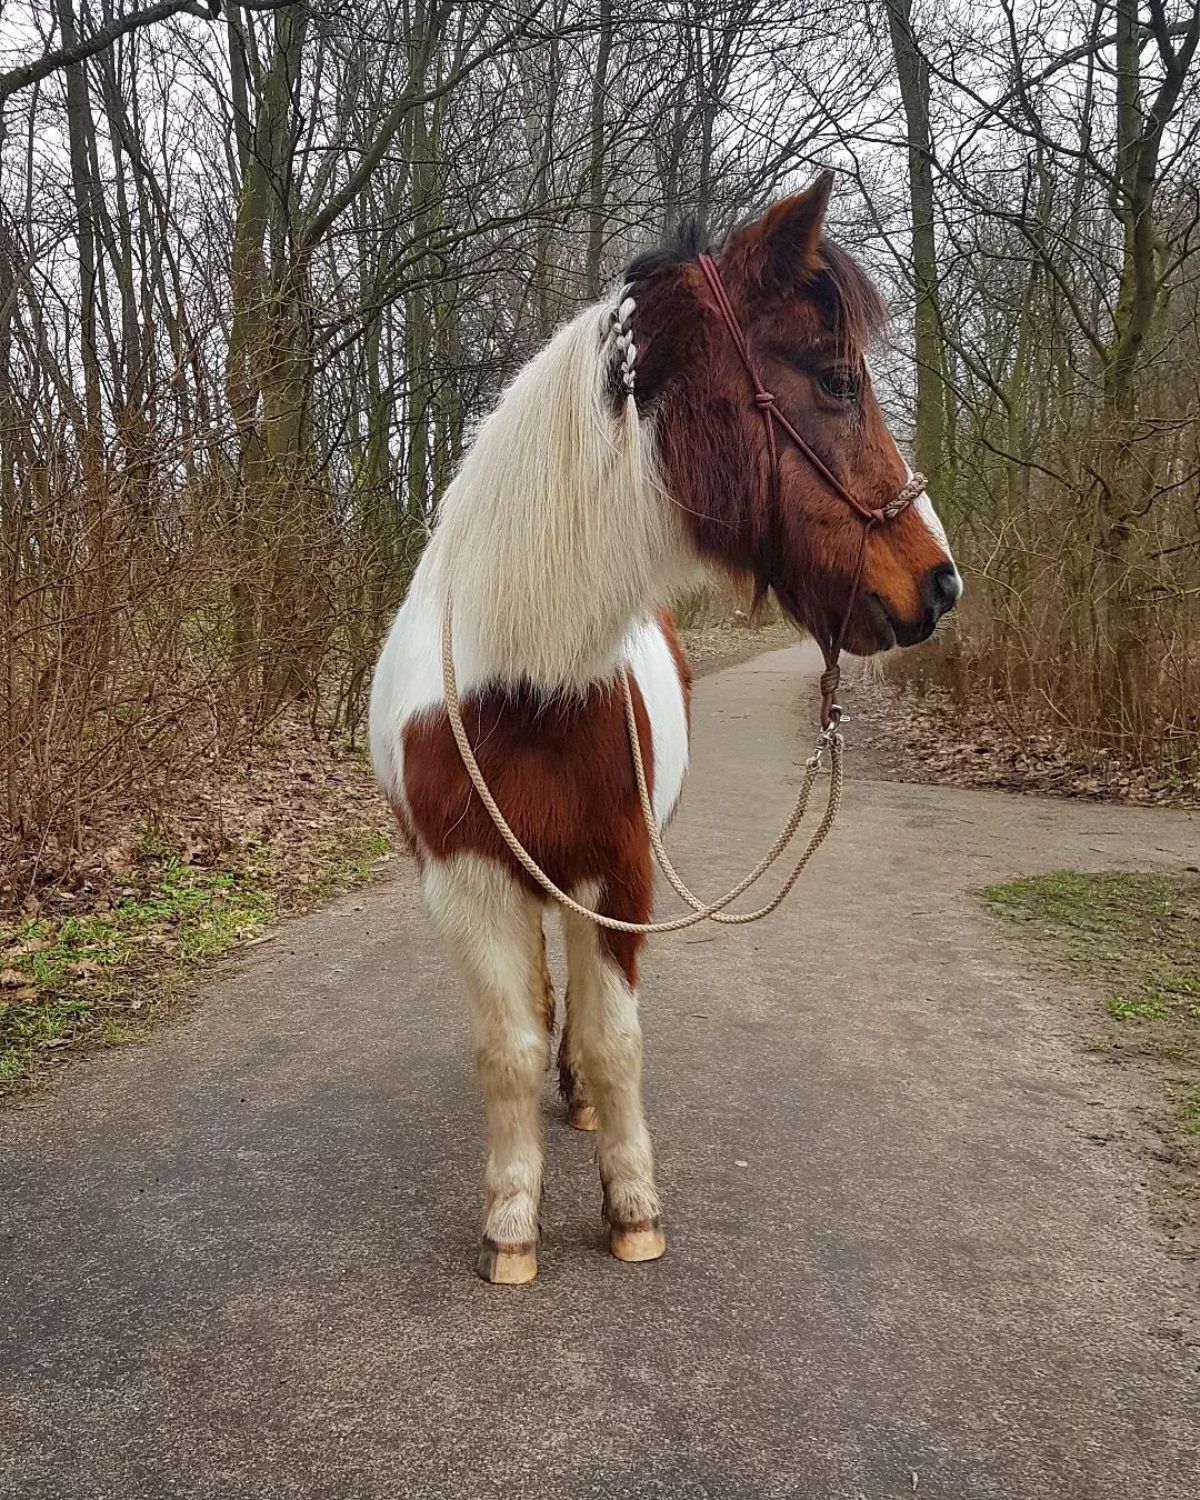 An adorable white-brown Welsh Pony stands on a road.